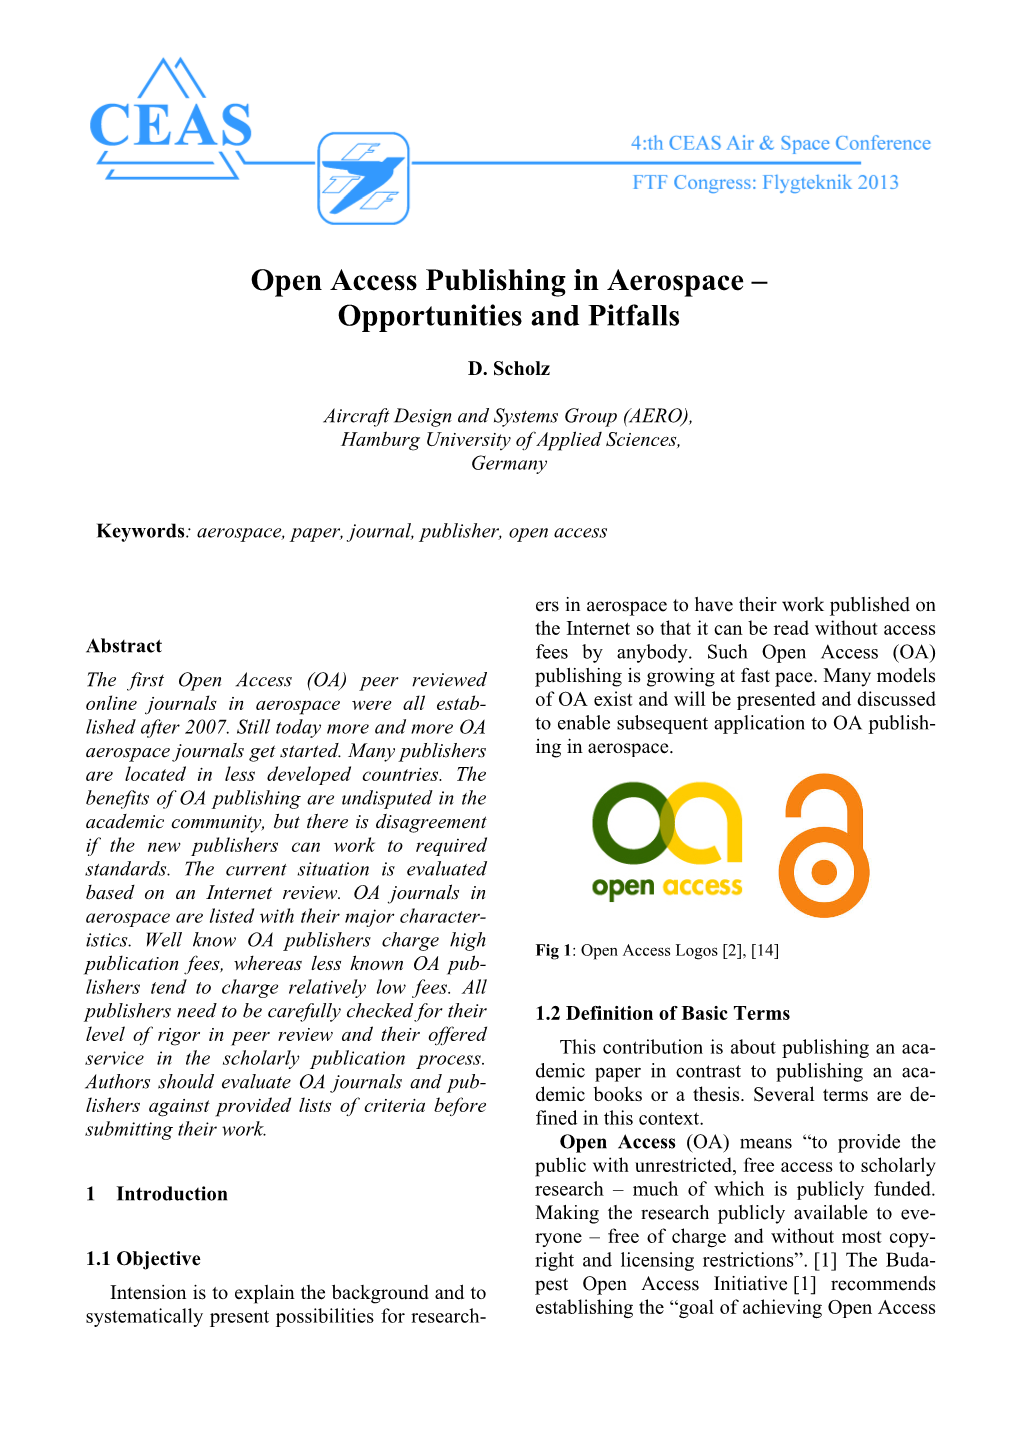 Open Access Publishing in Aerospace – Opportunities and Pitfalls